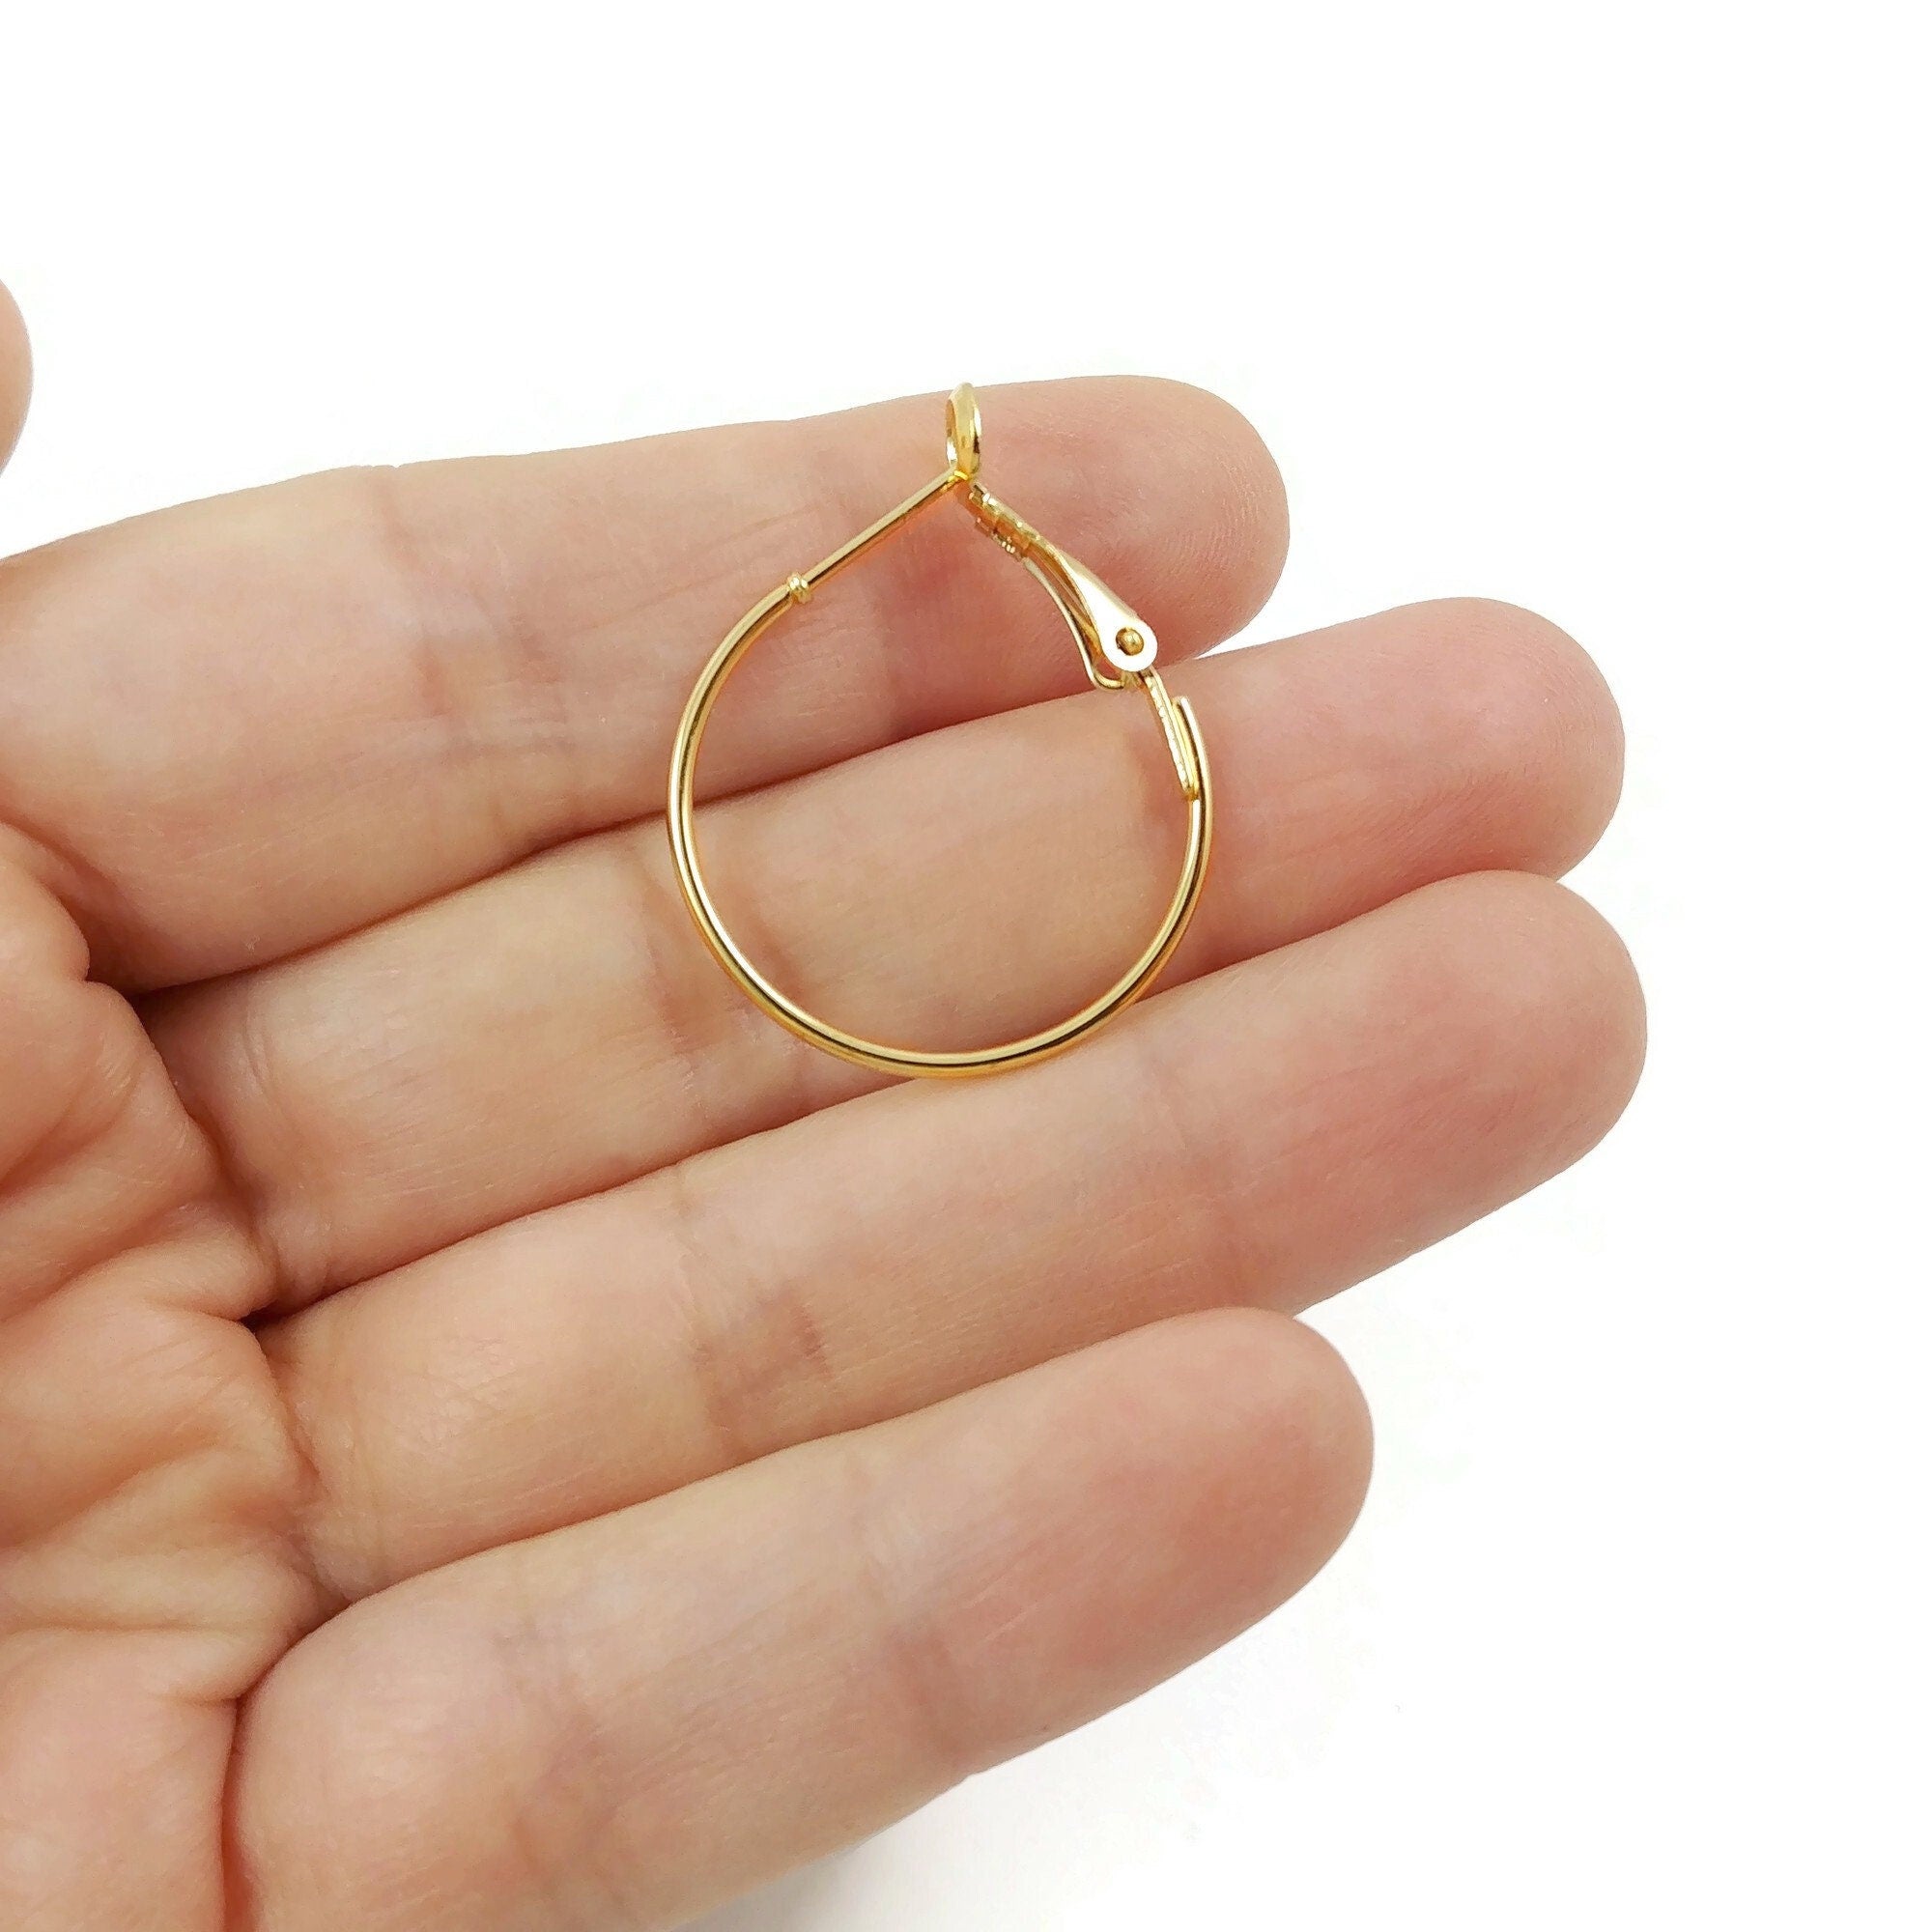 25mm real 18K gold plated hoops, 1 inch nickel free brass earwire, Leverback hoops for jewelry making